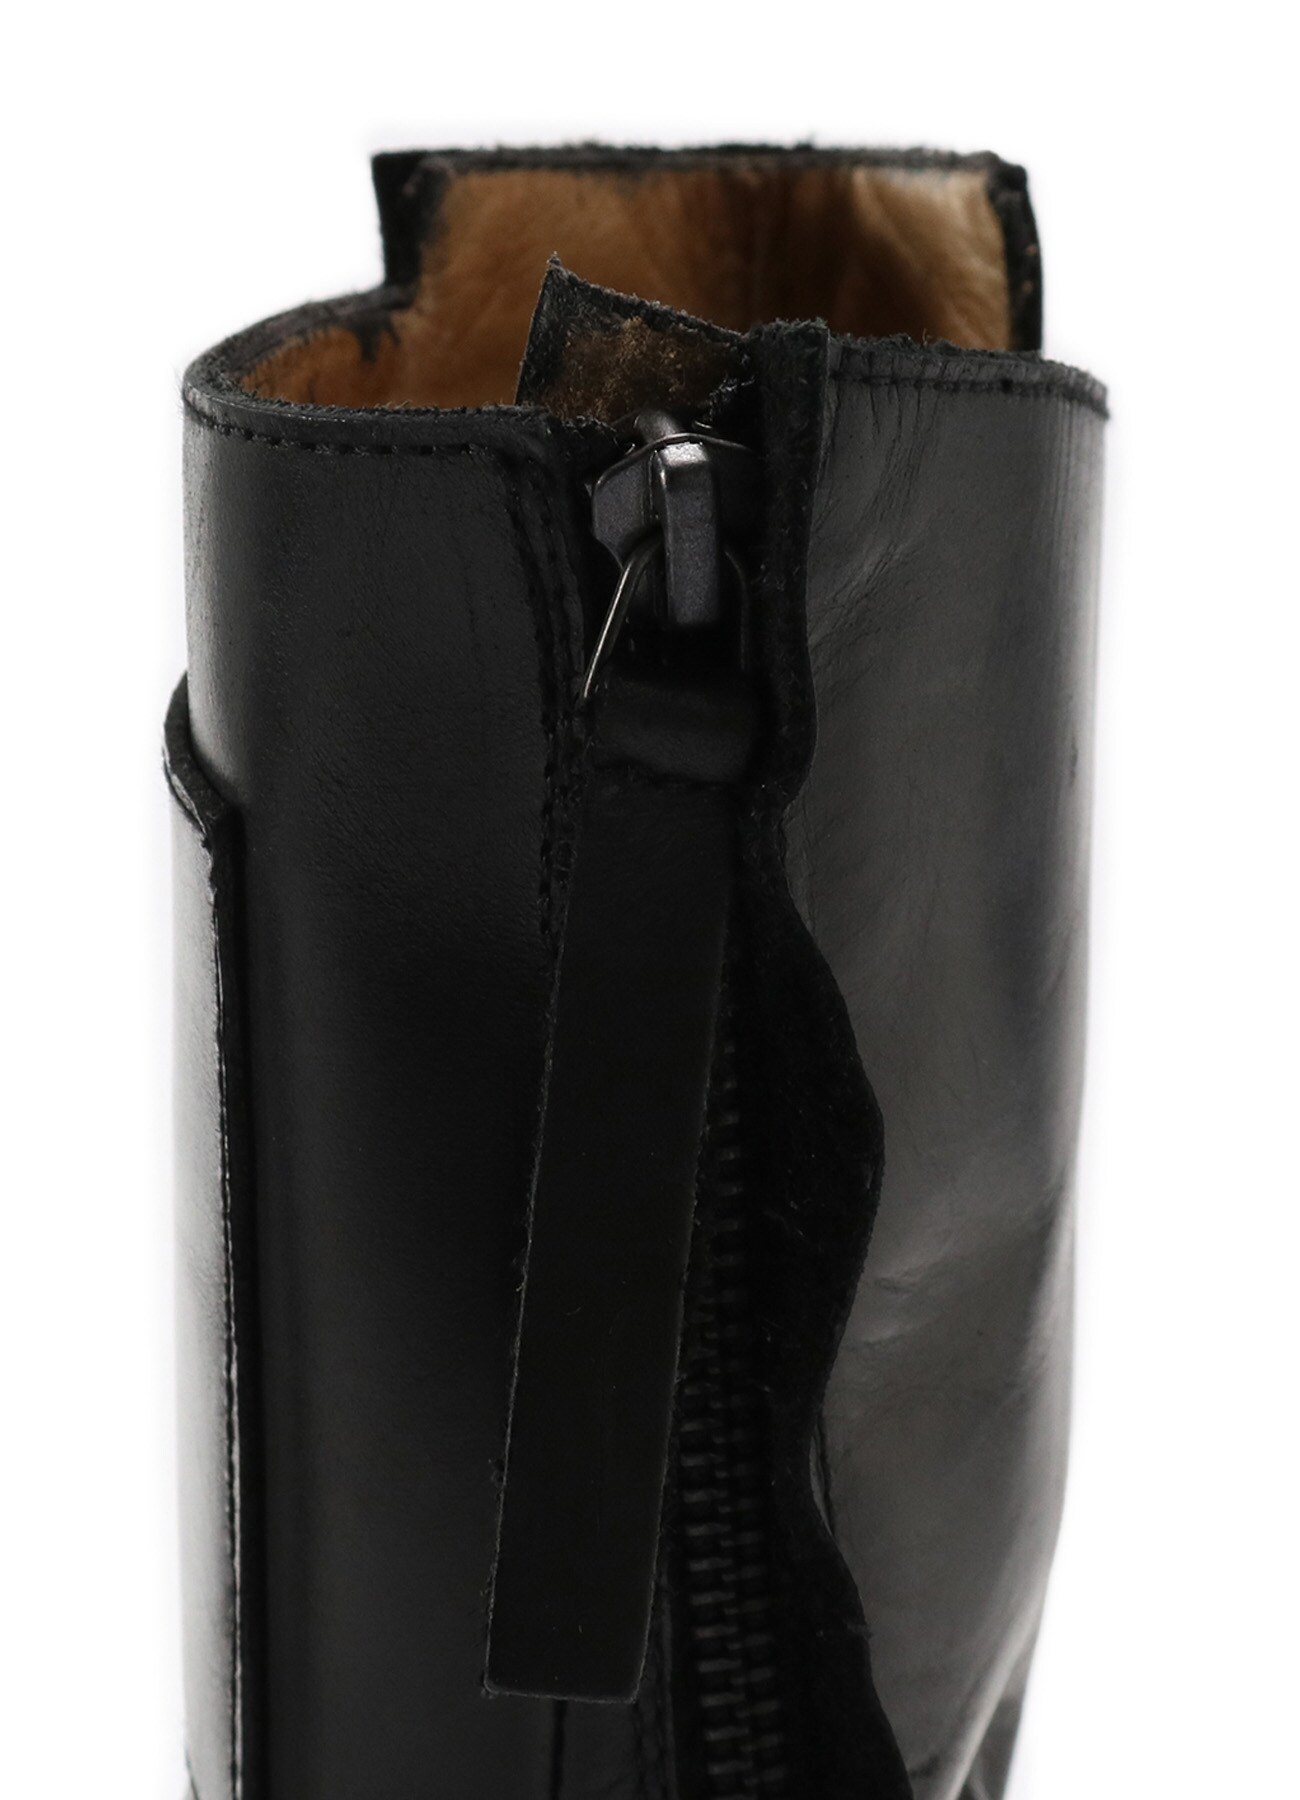 ITALIAN SMOOTH LEATHER MOOK-UP BOOTS